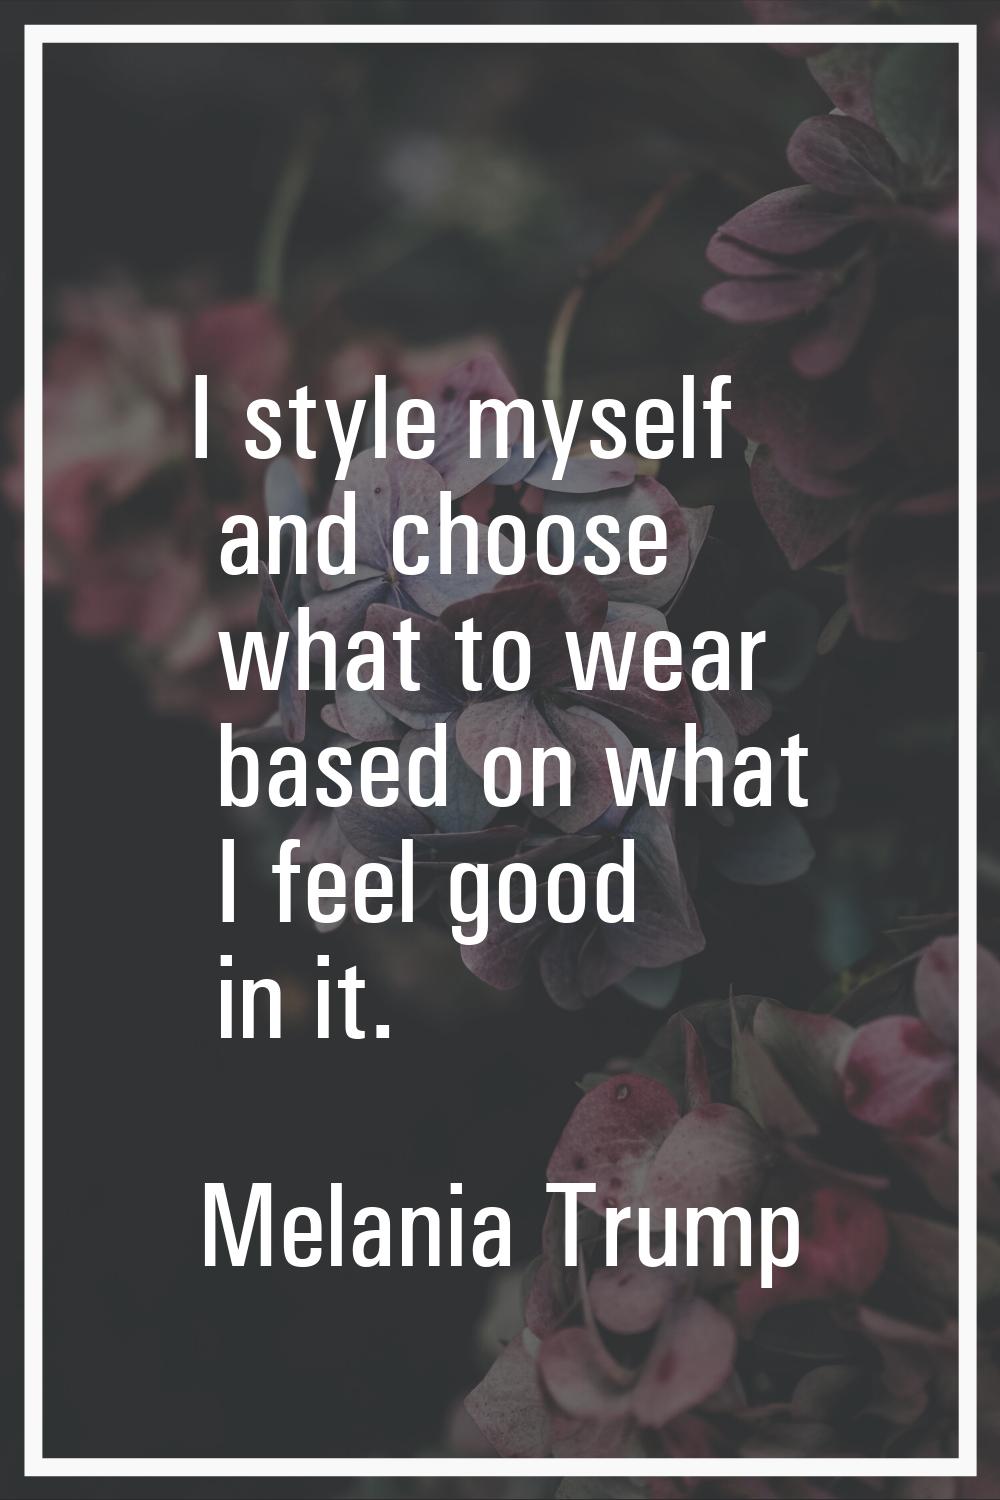 I style myself and choose what to wear based on what I feel good in it.